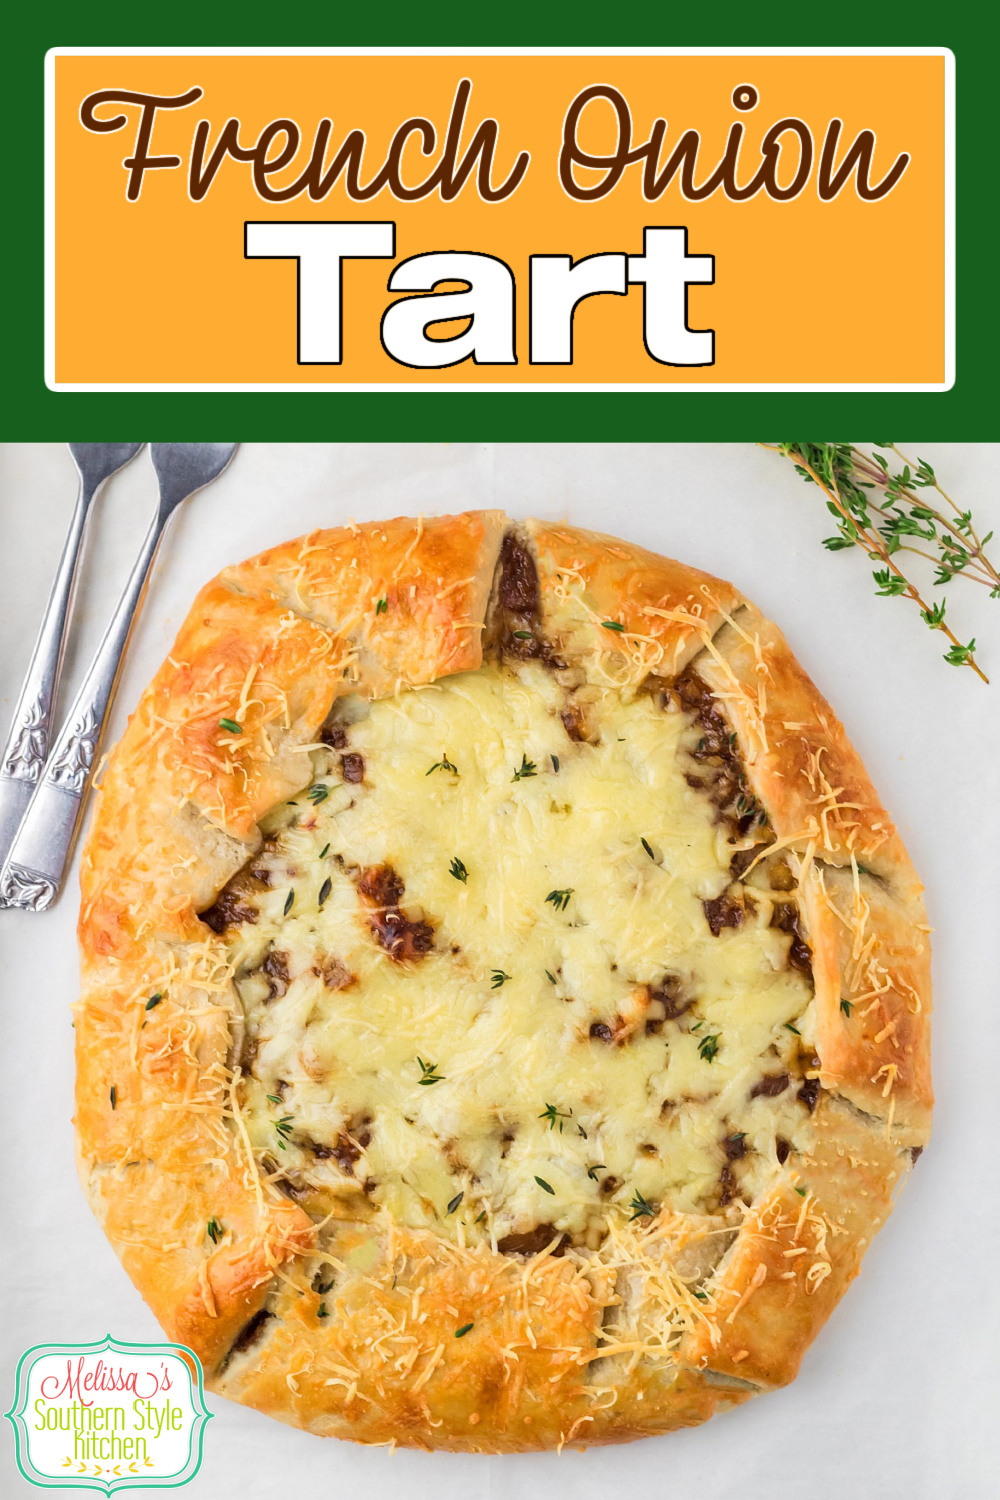 This rich and flavorful caramelized French Onion Tart recipe can be served as an appetizer, side dish or an entree #frenchonion #tarts #tartrecipes #frenchoniontart #easytartrecipes #frenchonionsoup #onions via @melissasssk